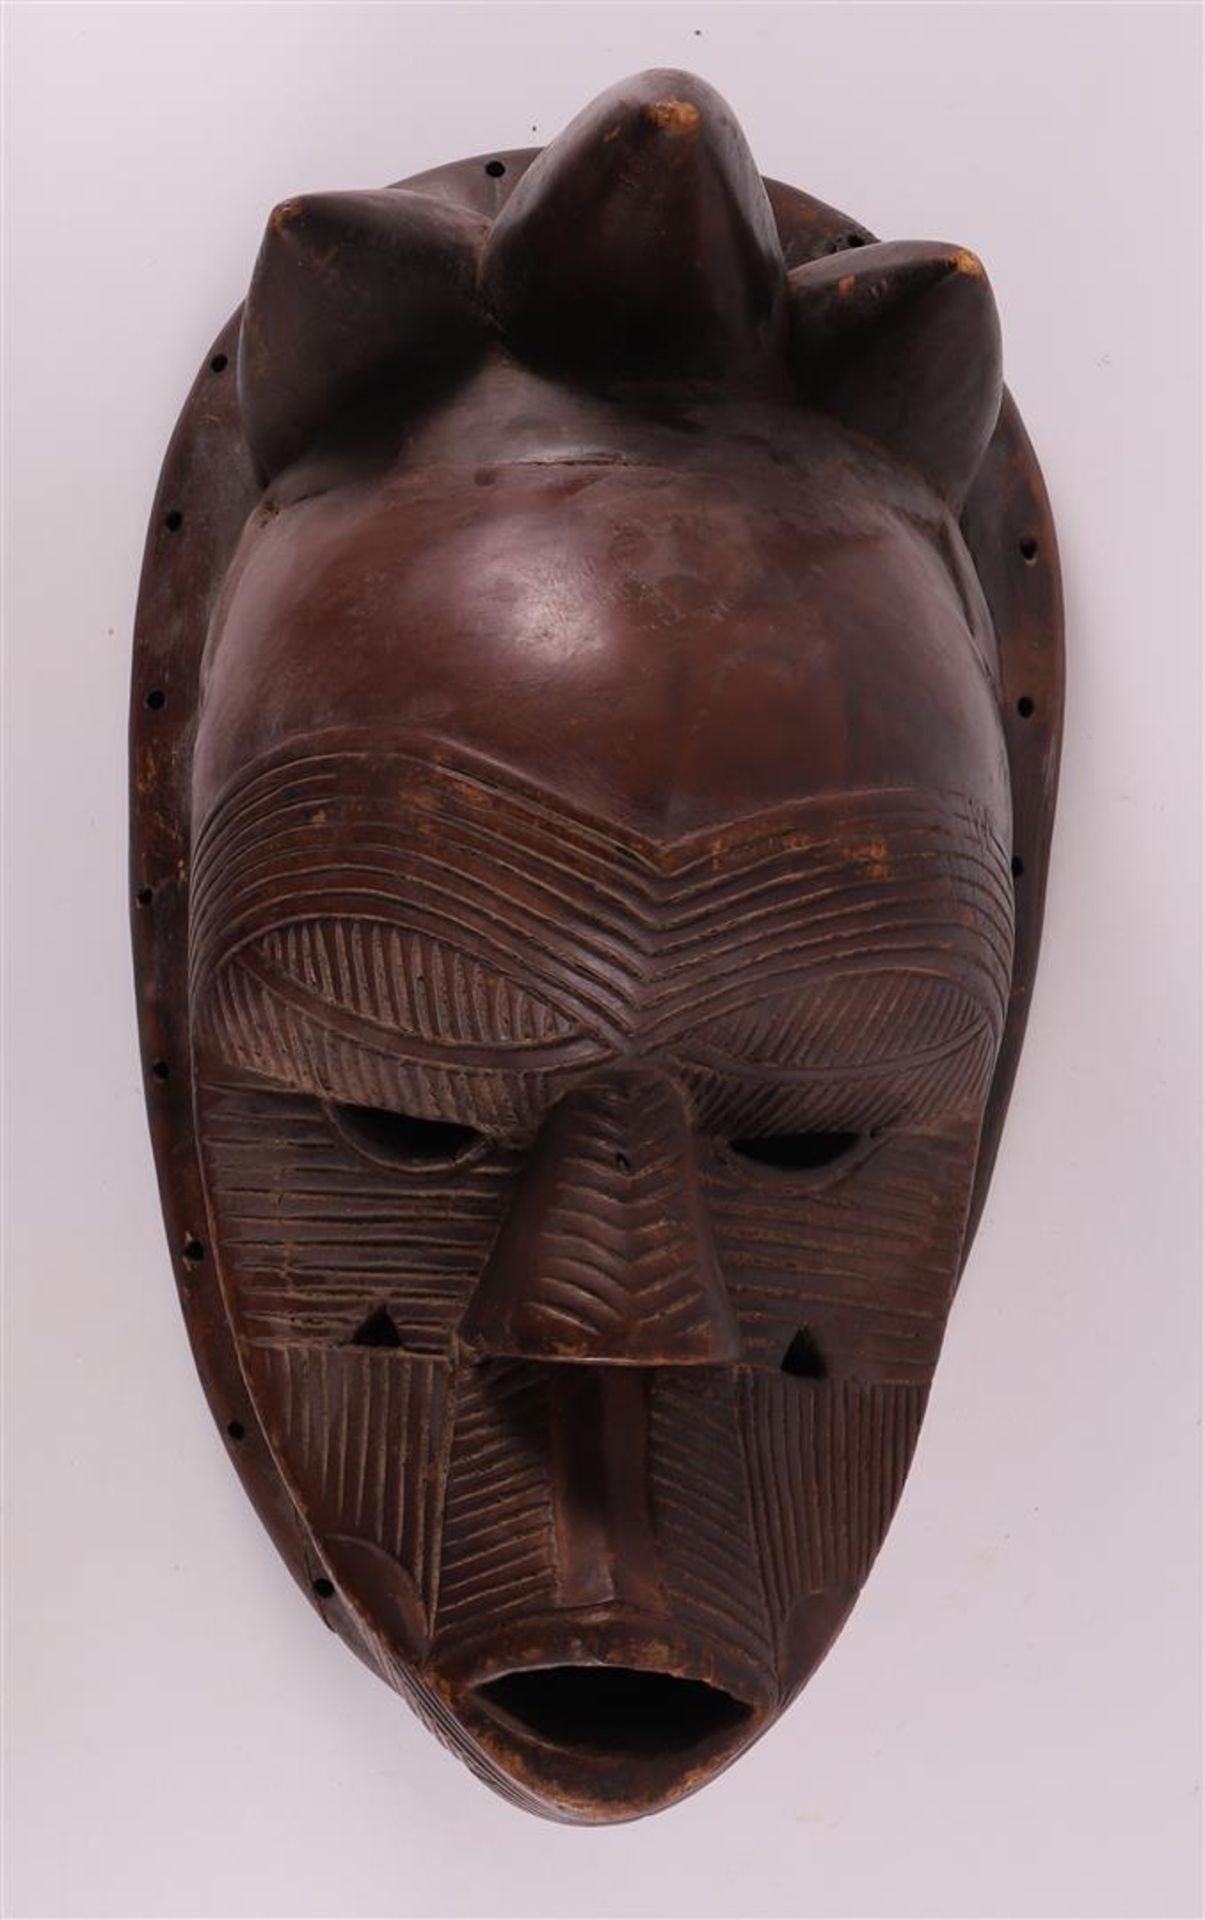 Ethnographic/tribal. A wooden mask, Basonge, Congo, Africa, 2nd half of the 20th